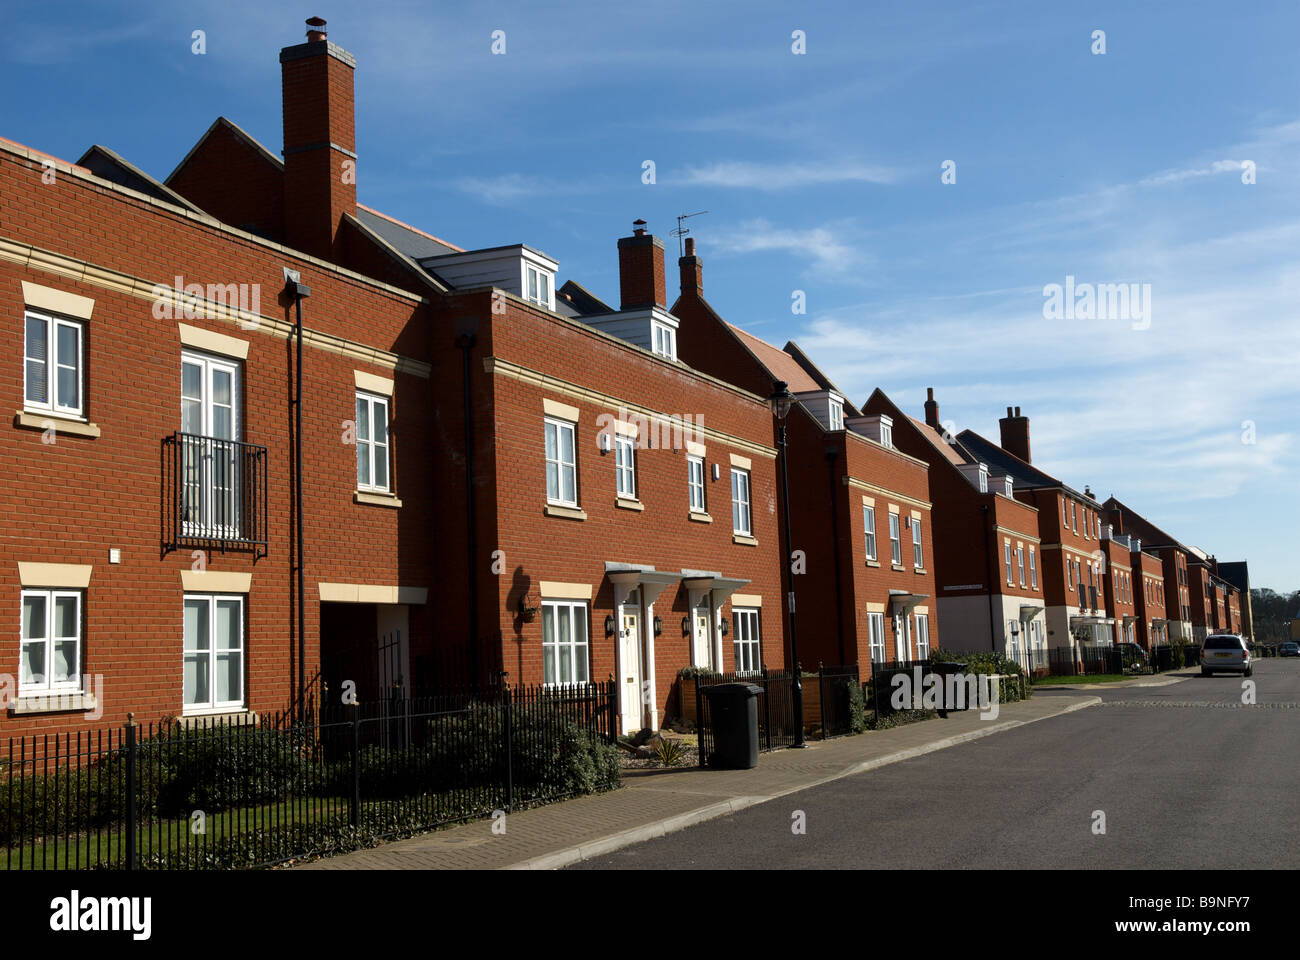 Residential street, on the newly built Ravenswood Estate, Ipswich, Suffolk, UK. Stock Photo